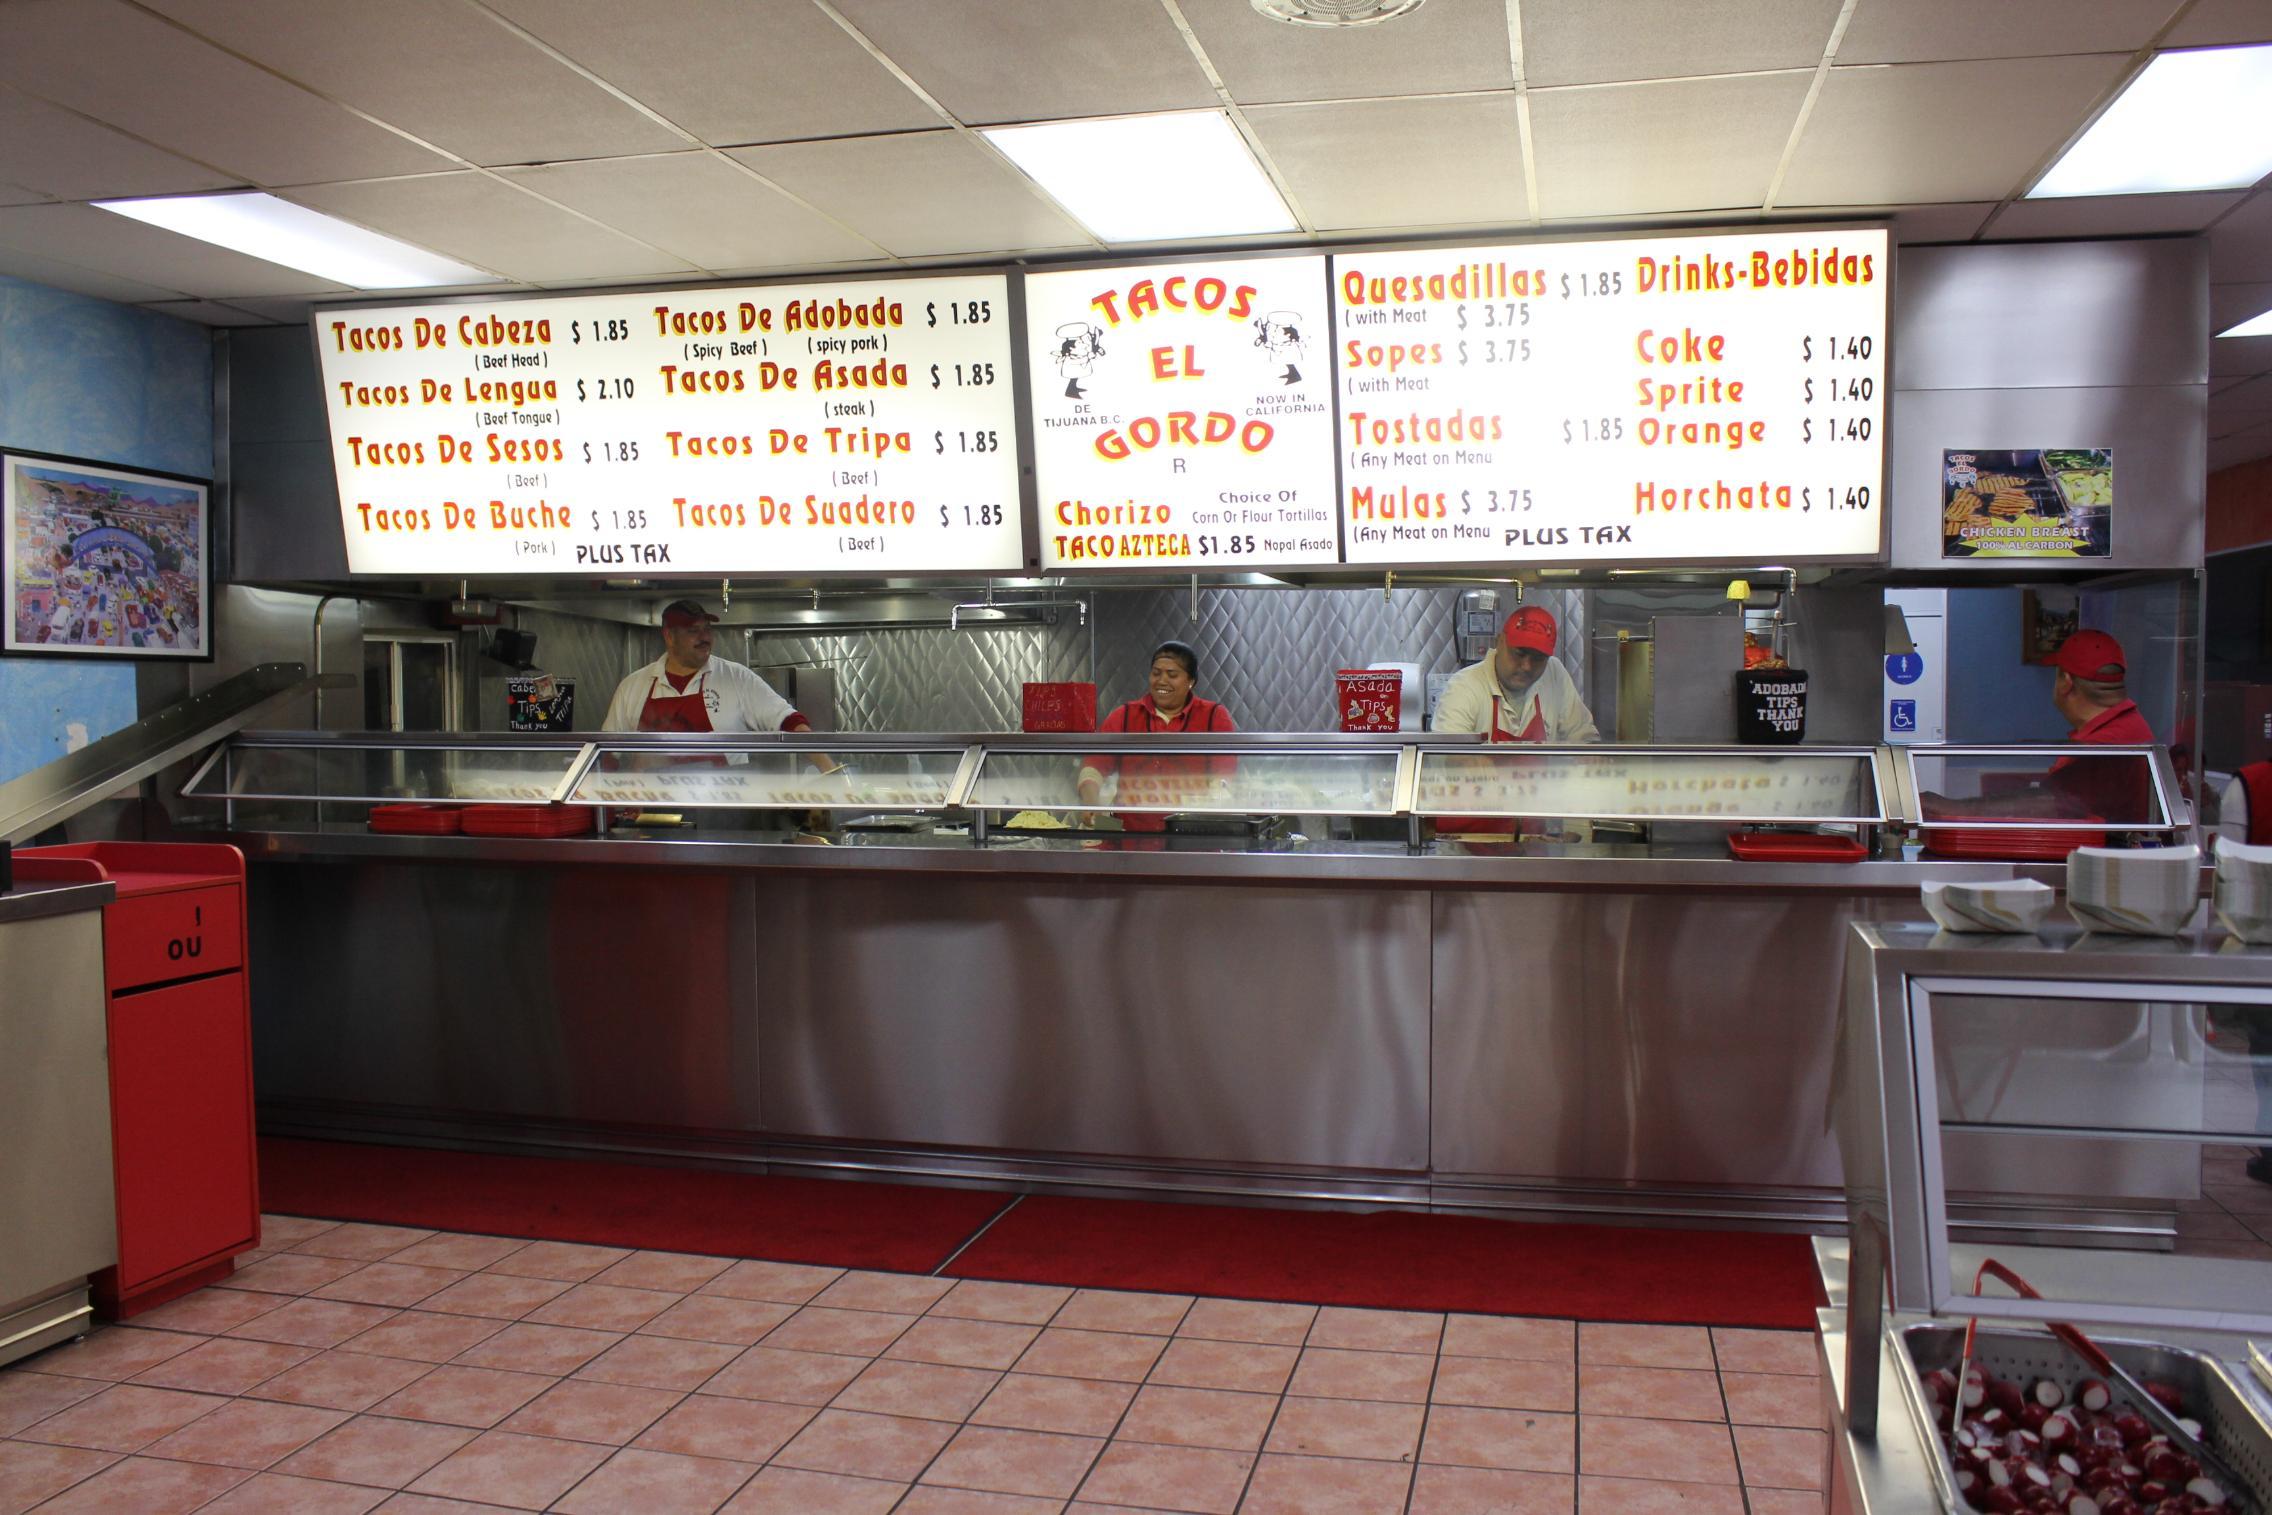 Cover image of this place Tacos el Gordo